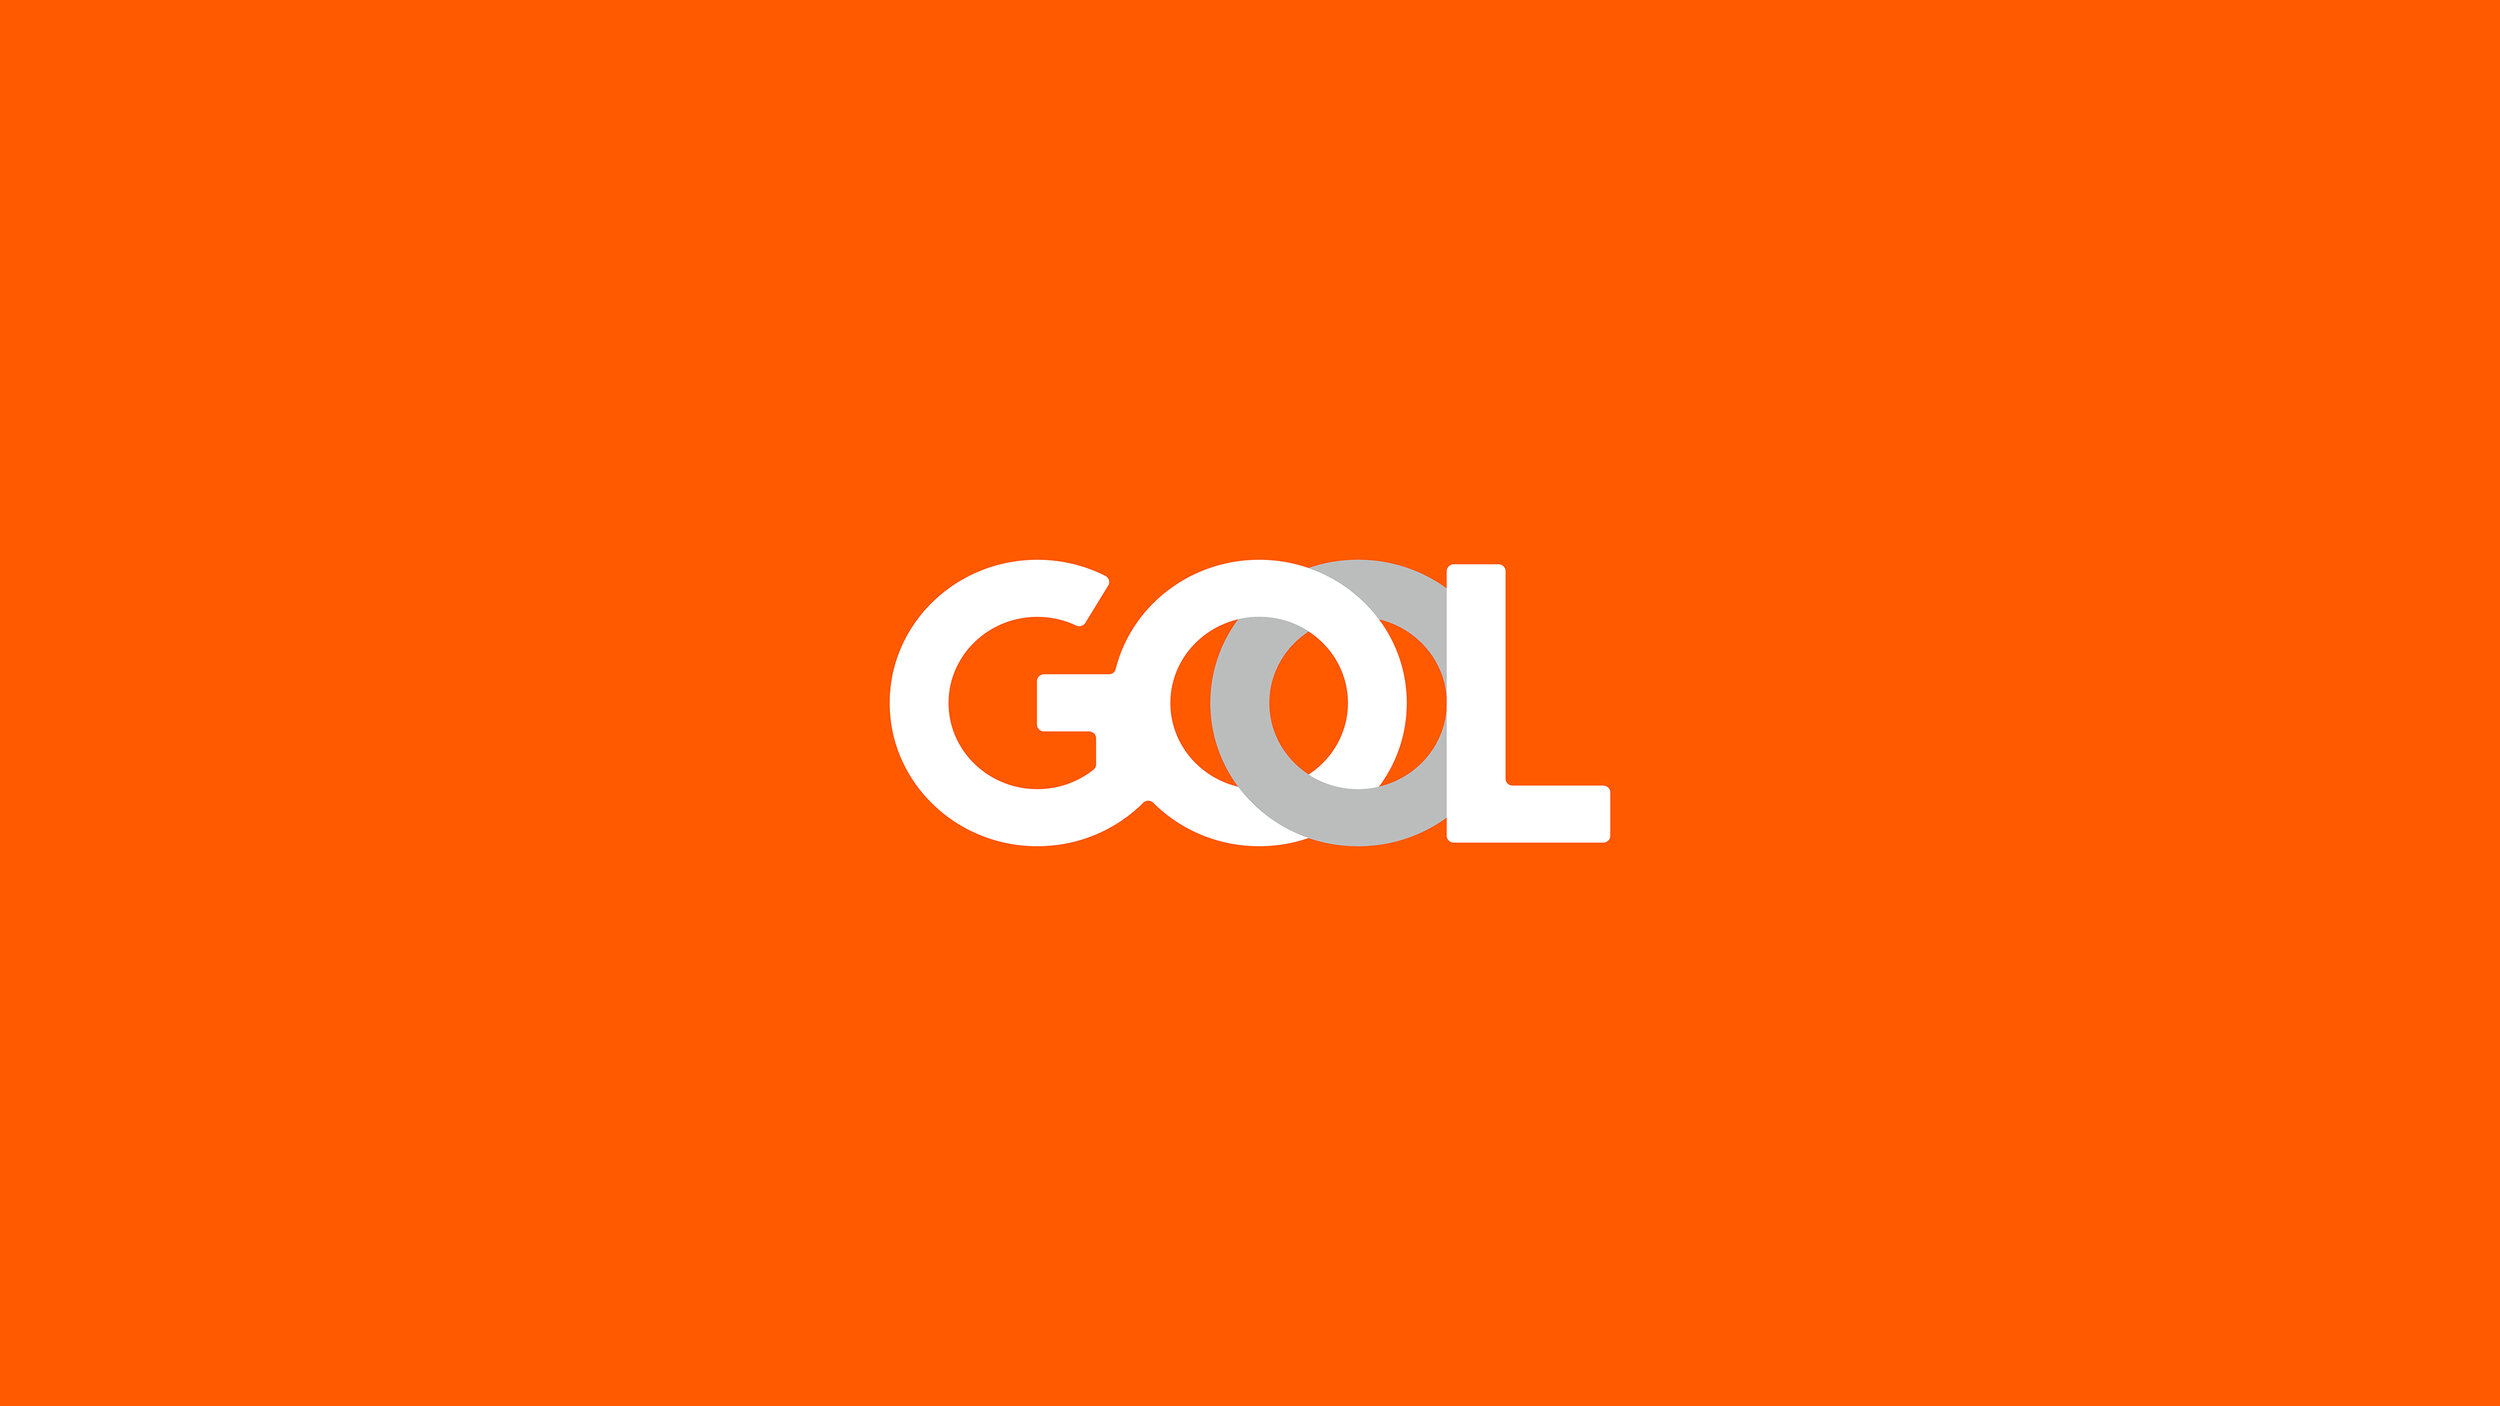 Brand New: New Logo and Livery for GOL by AlmapBBDO